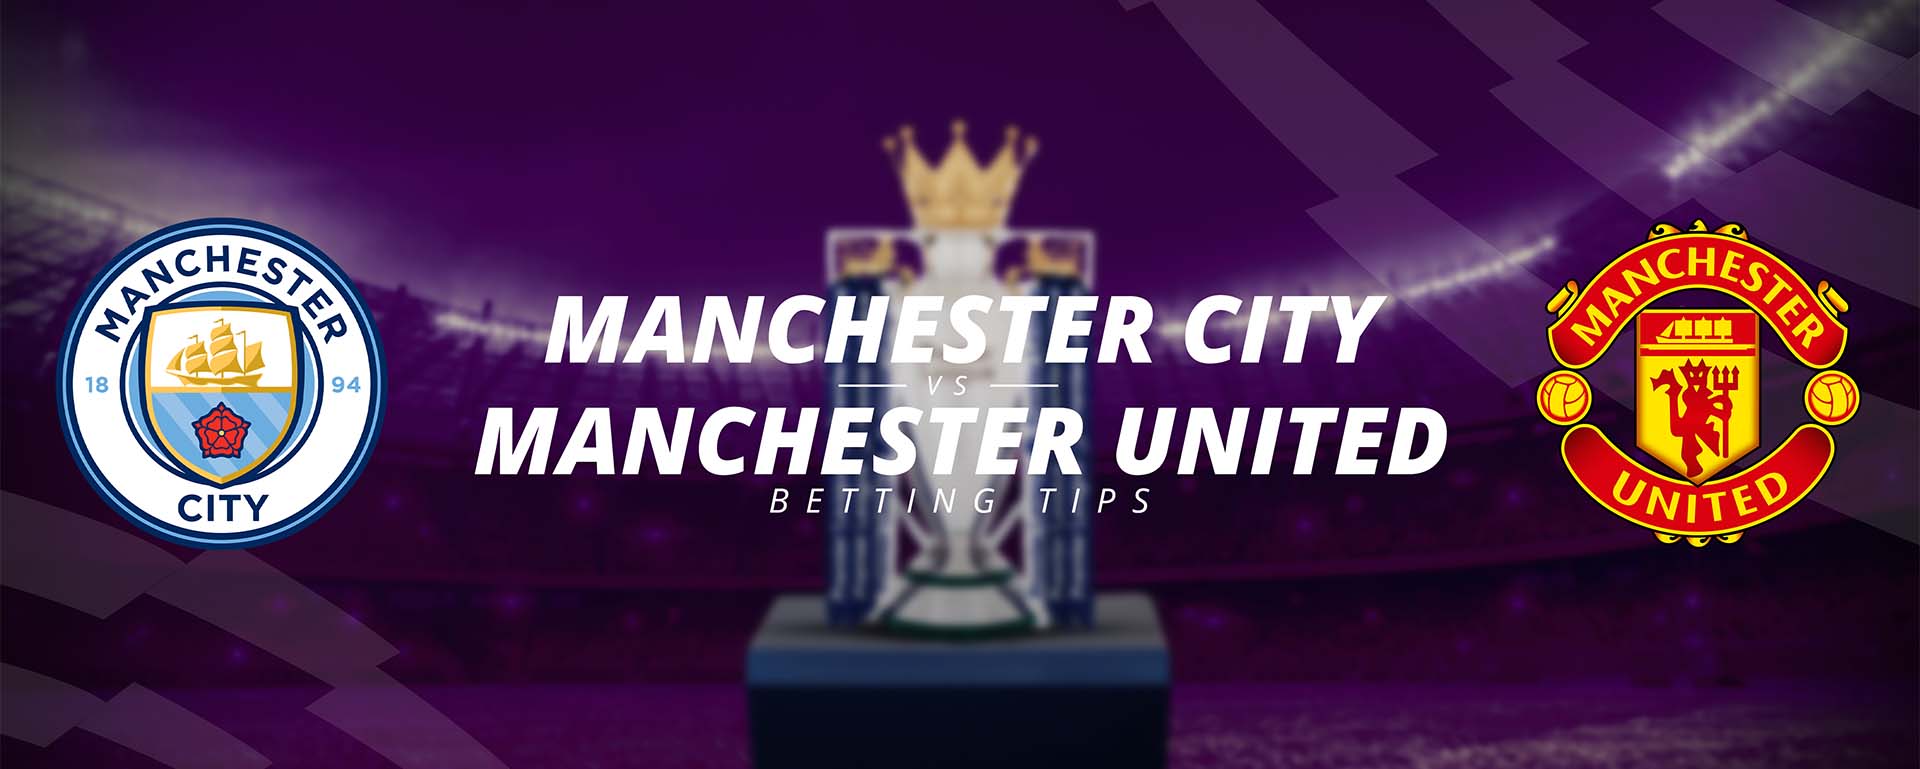 MANCHESTER CITY VS MANCHESTER UNITED: BETTING TIPS